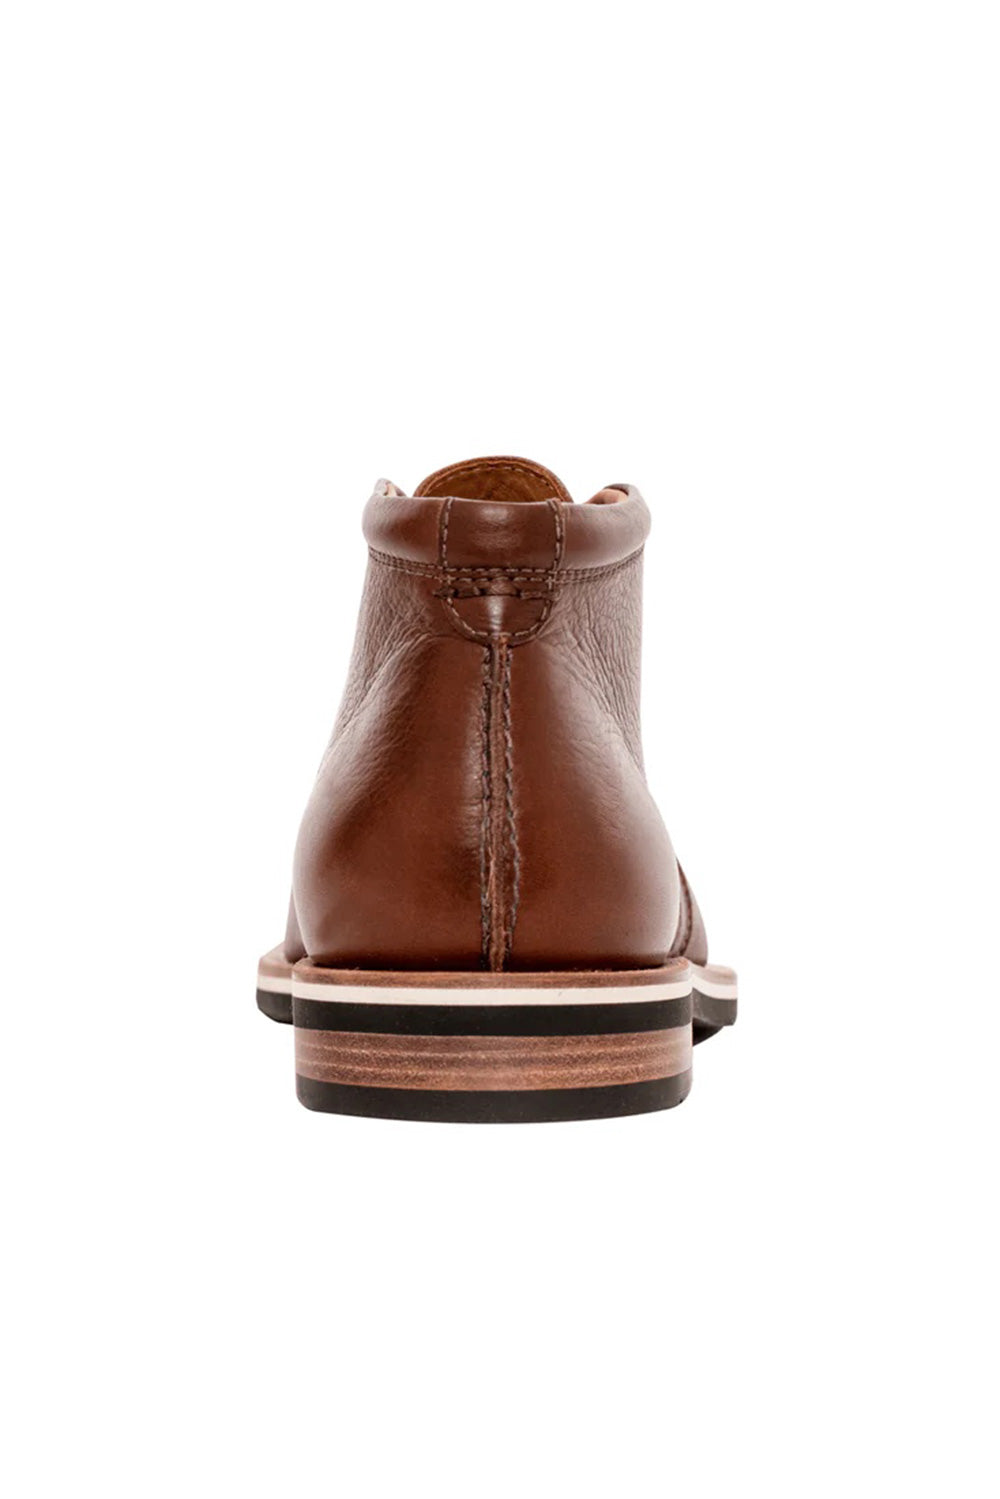 Helm Boots - The Hynes - Brown - Back